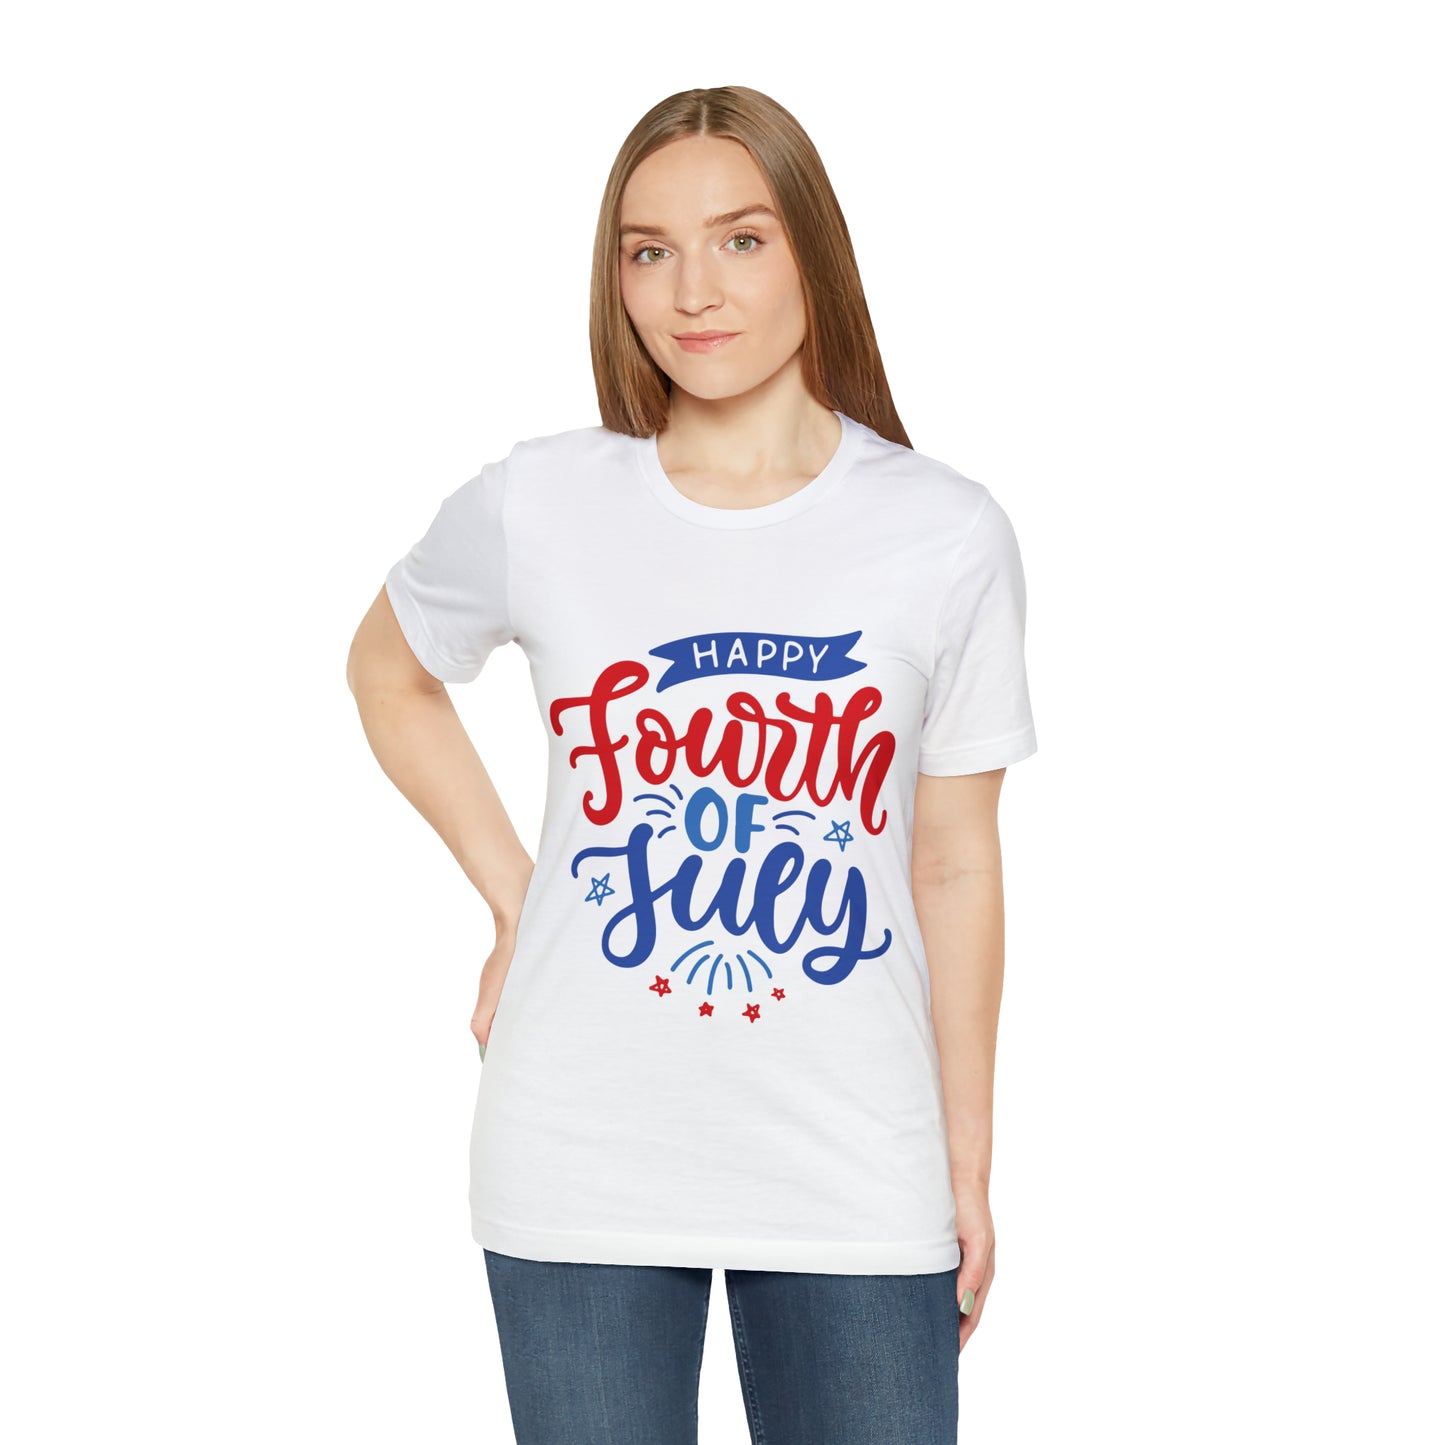 T-Shirt Tshirt Design Gift for Friend and Family Short Sleeved Shirt July 4th Independence Day Petrova Designs